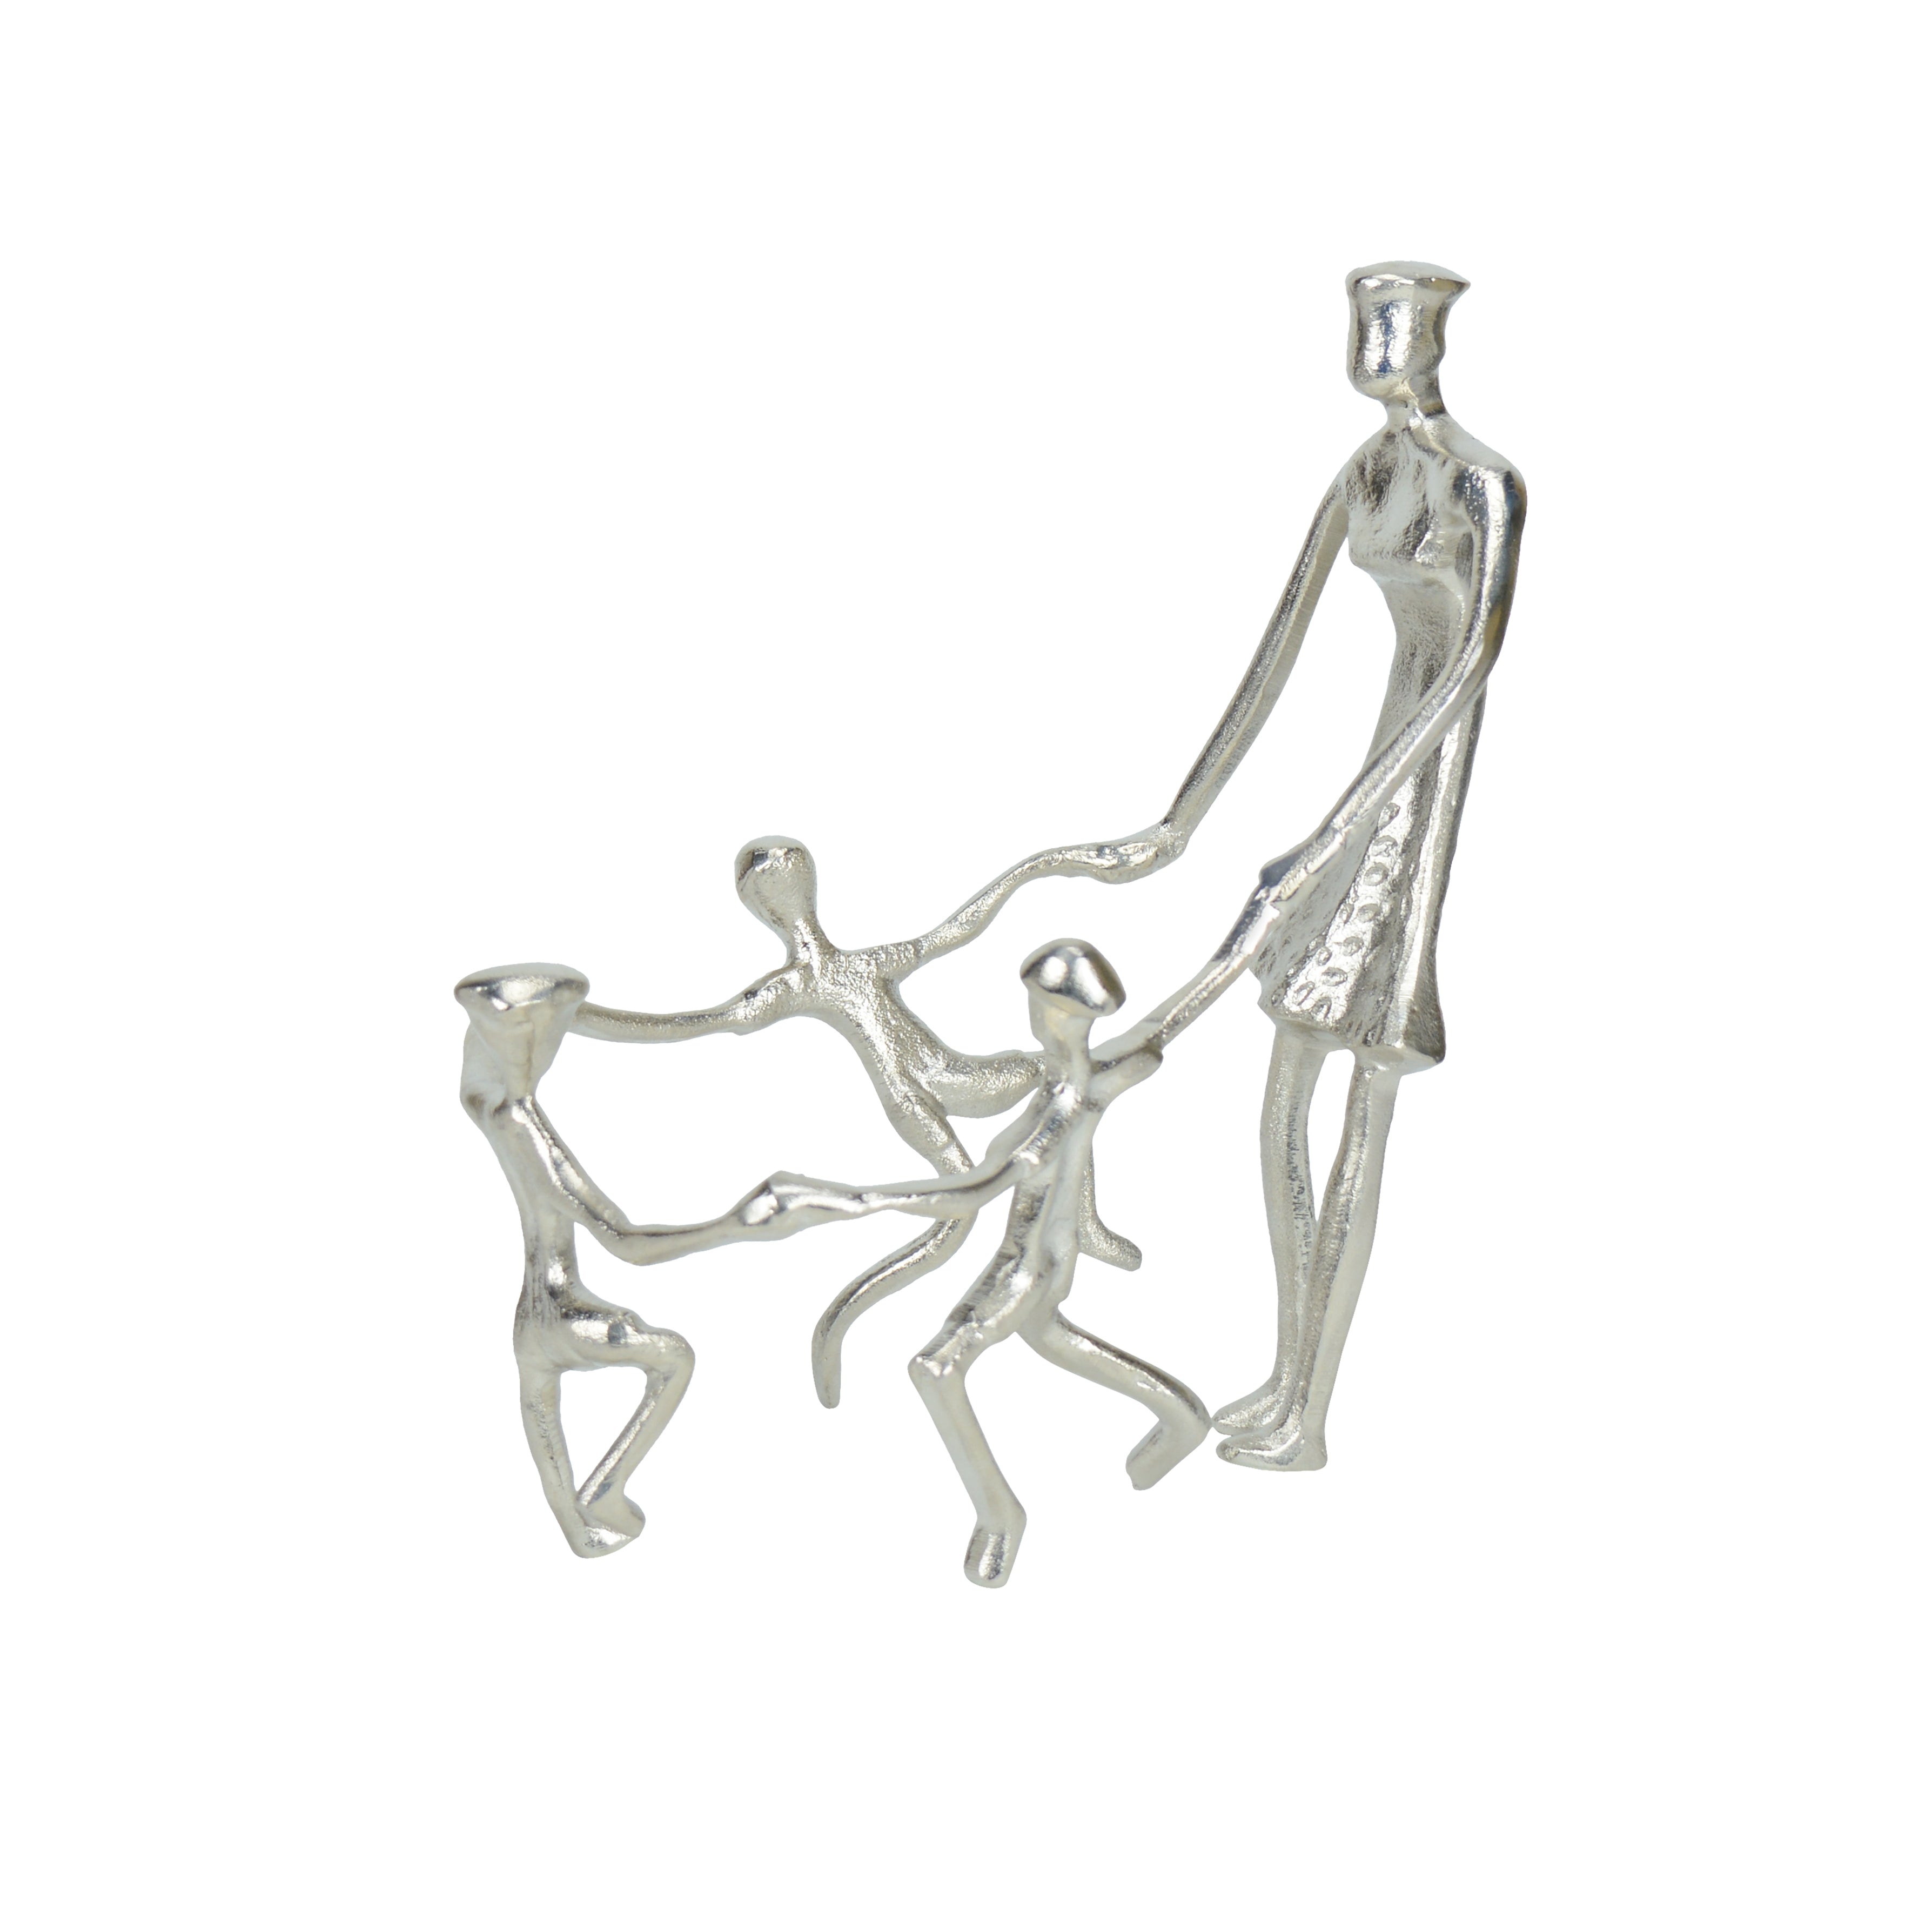 Togetherness Mother and Kids Silver Sculpture